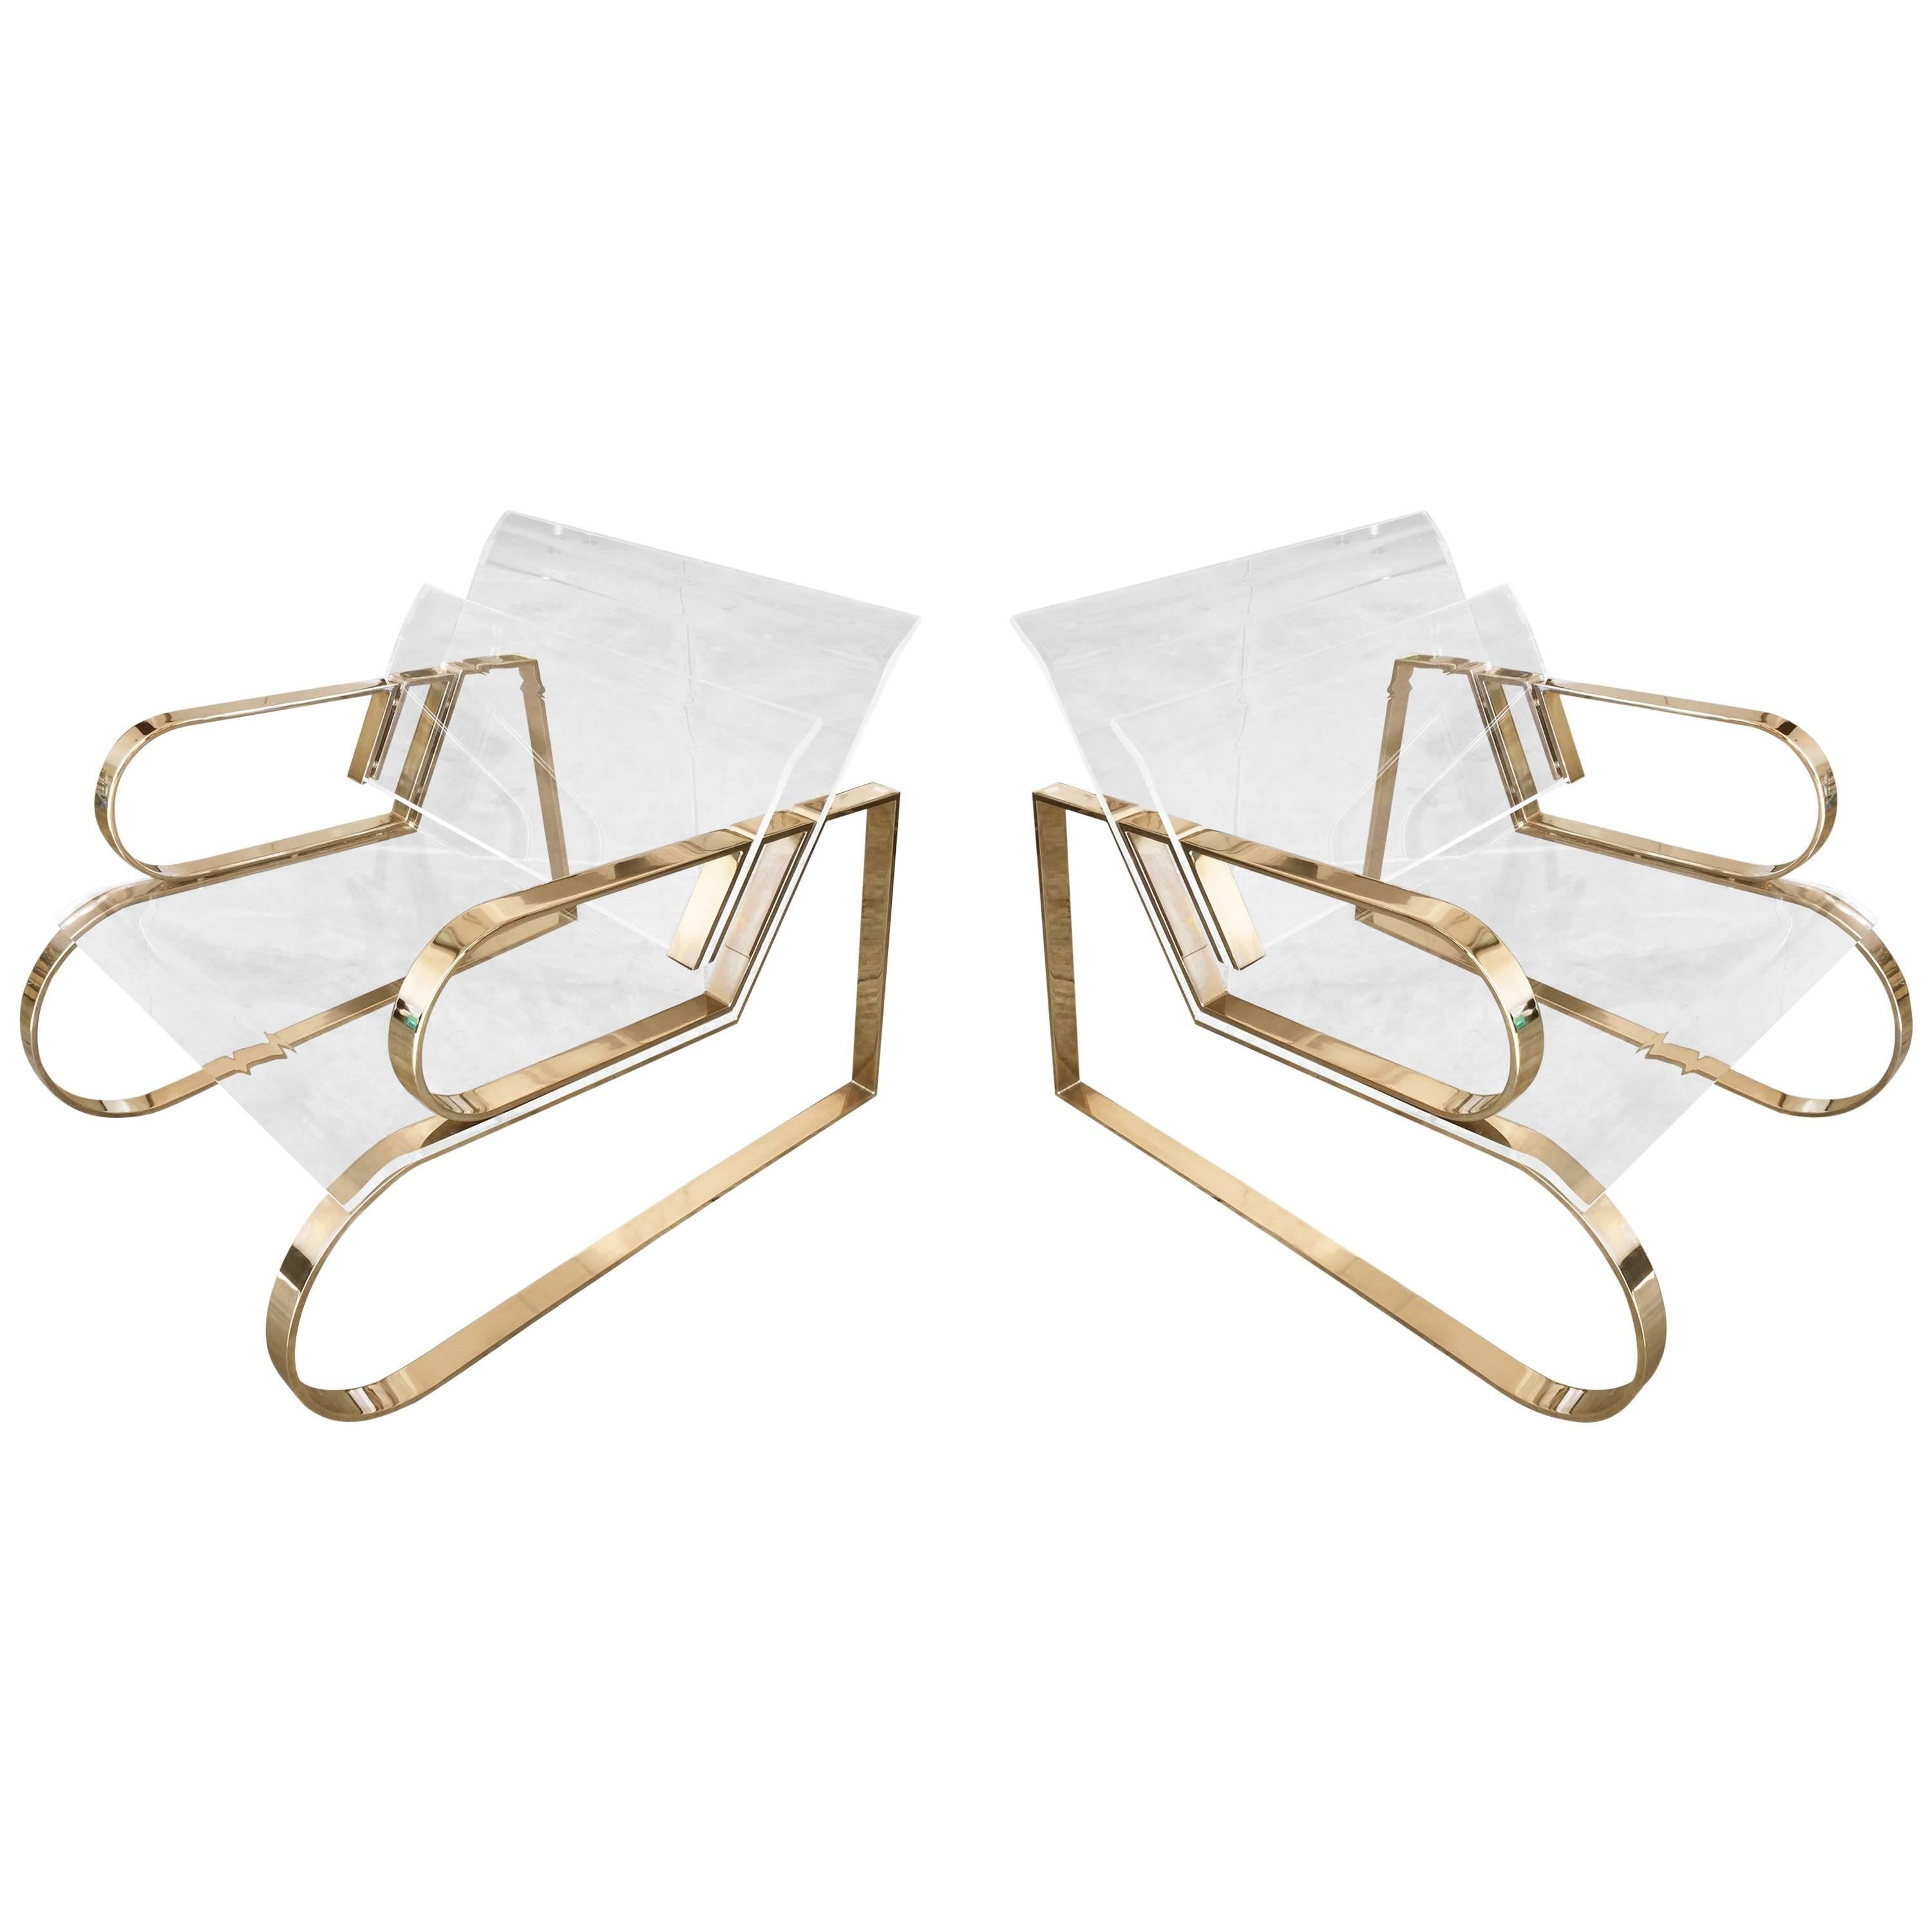 Pair of Brass & Lucite "Double Waterfall" Lounge Chairs by Charles Hollis Jones